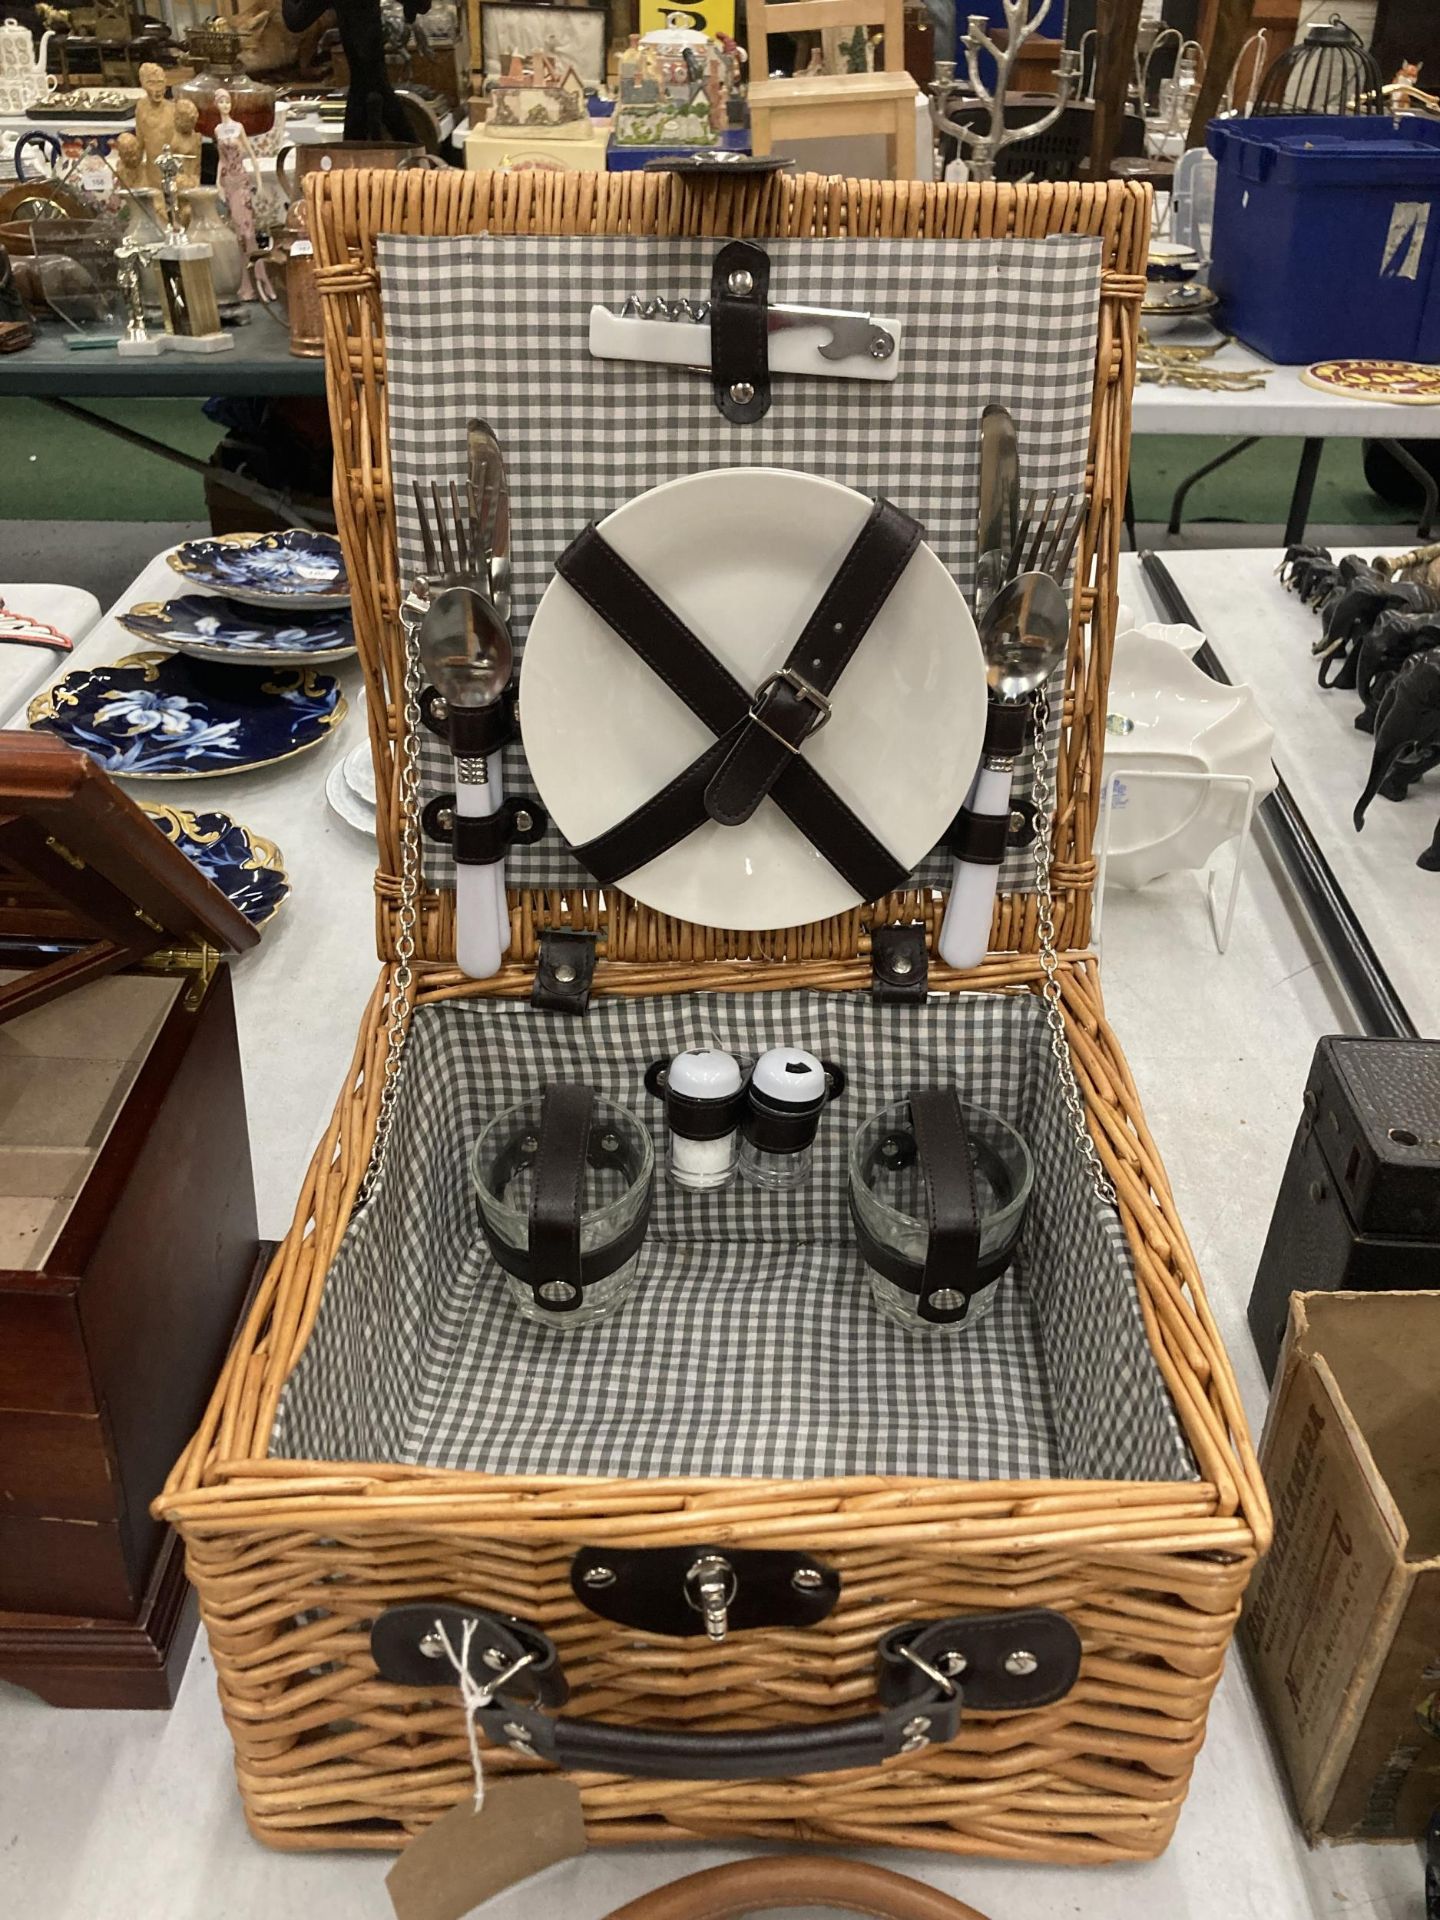 A PICNIC BASKET TO INCLUDE ACCESSORIES